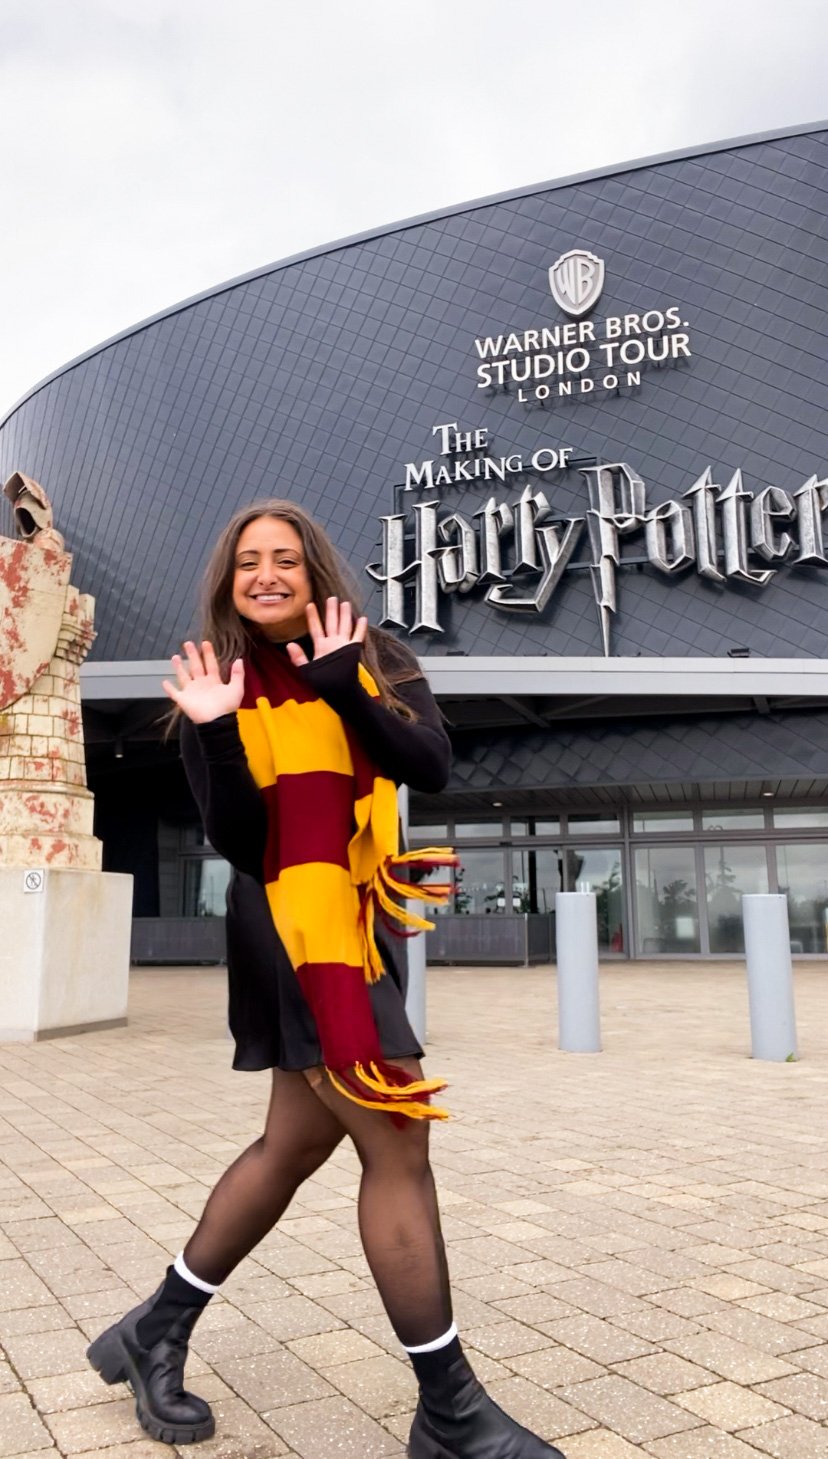  In London, Rhodes also recorded content at the Harry Potter Warner Bros Studio Tour, a walkthrough exhibition and studio tour in Leavesden, England. (Becca Rhodes/The Film Tripper) 